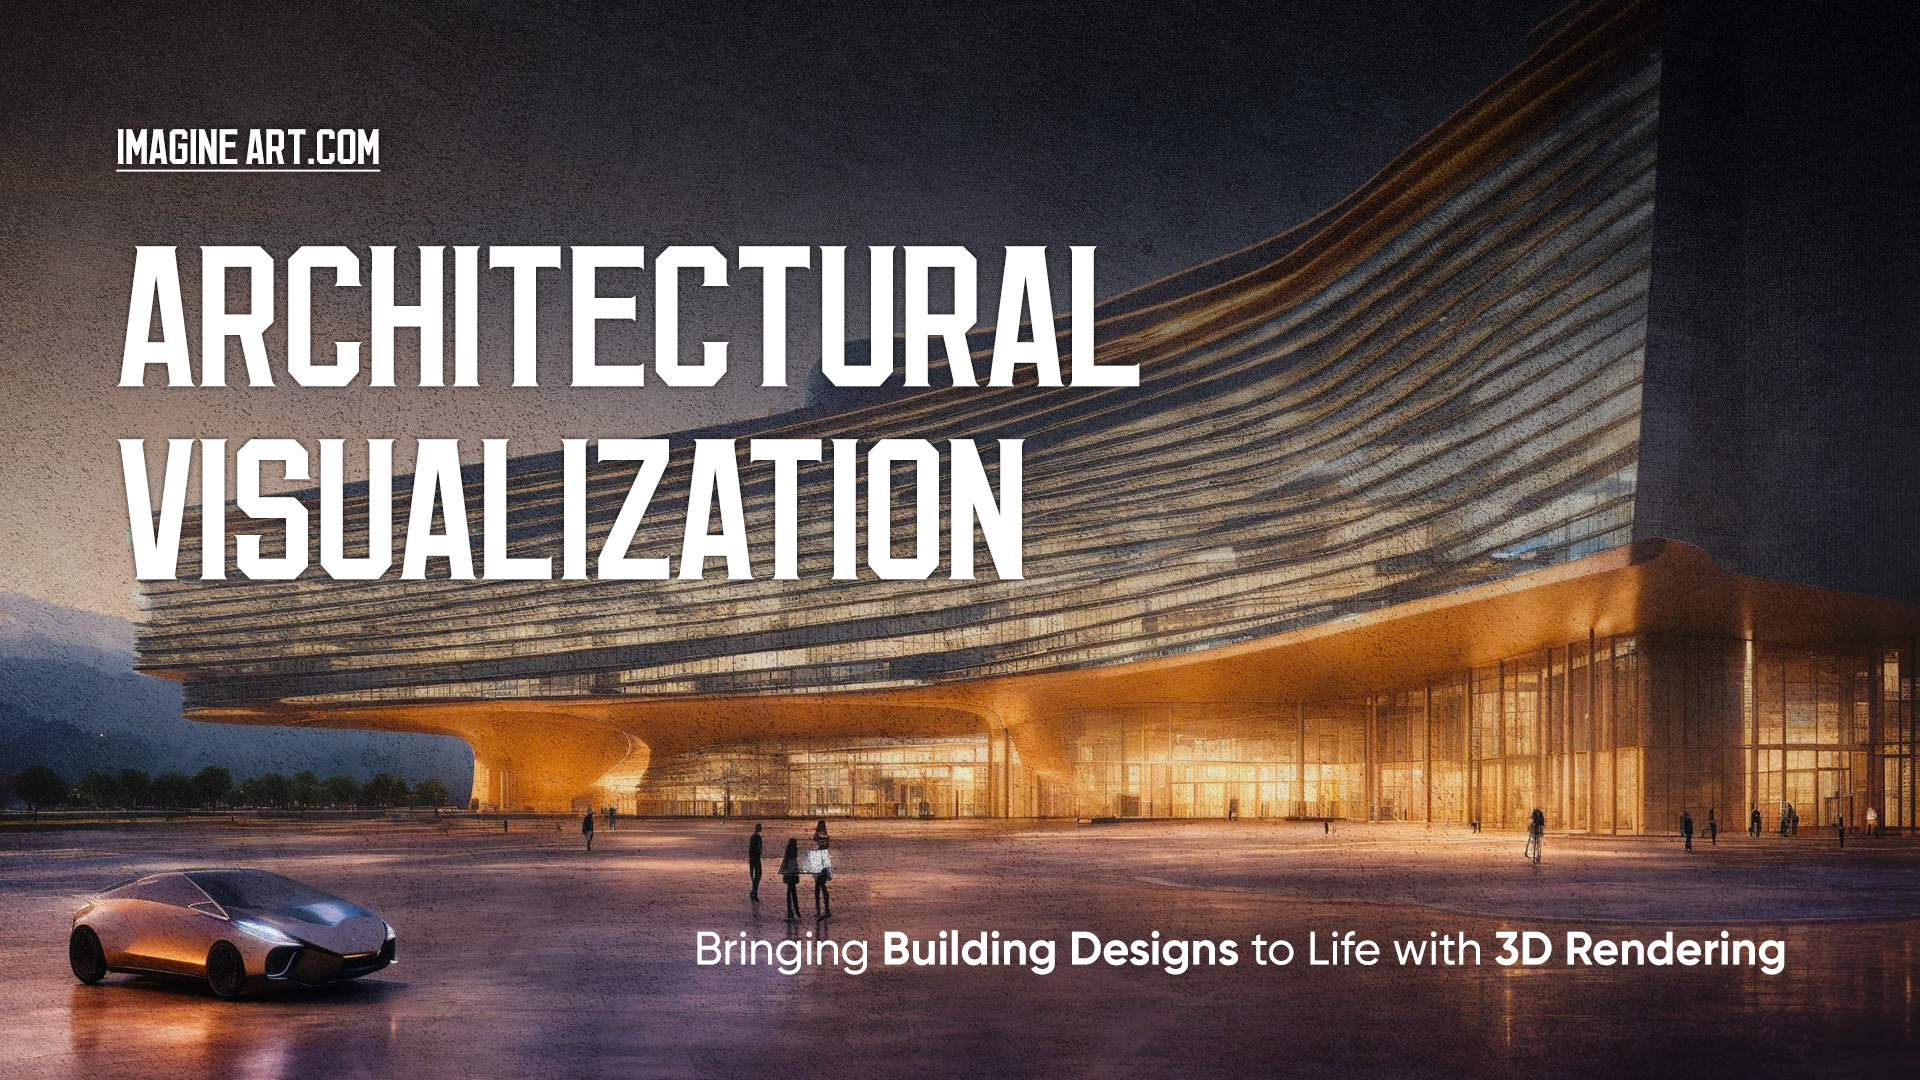 Architectural Visualization: Bringing Building Designs to Life with 3D Rendering